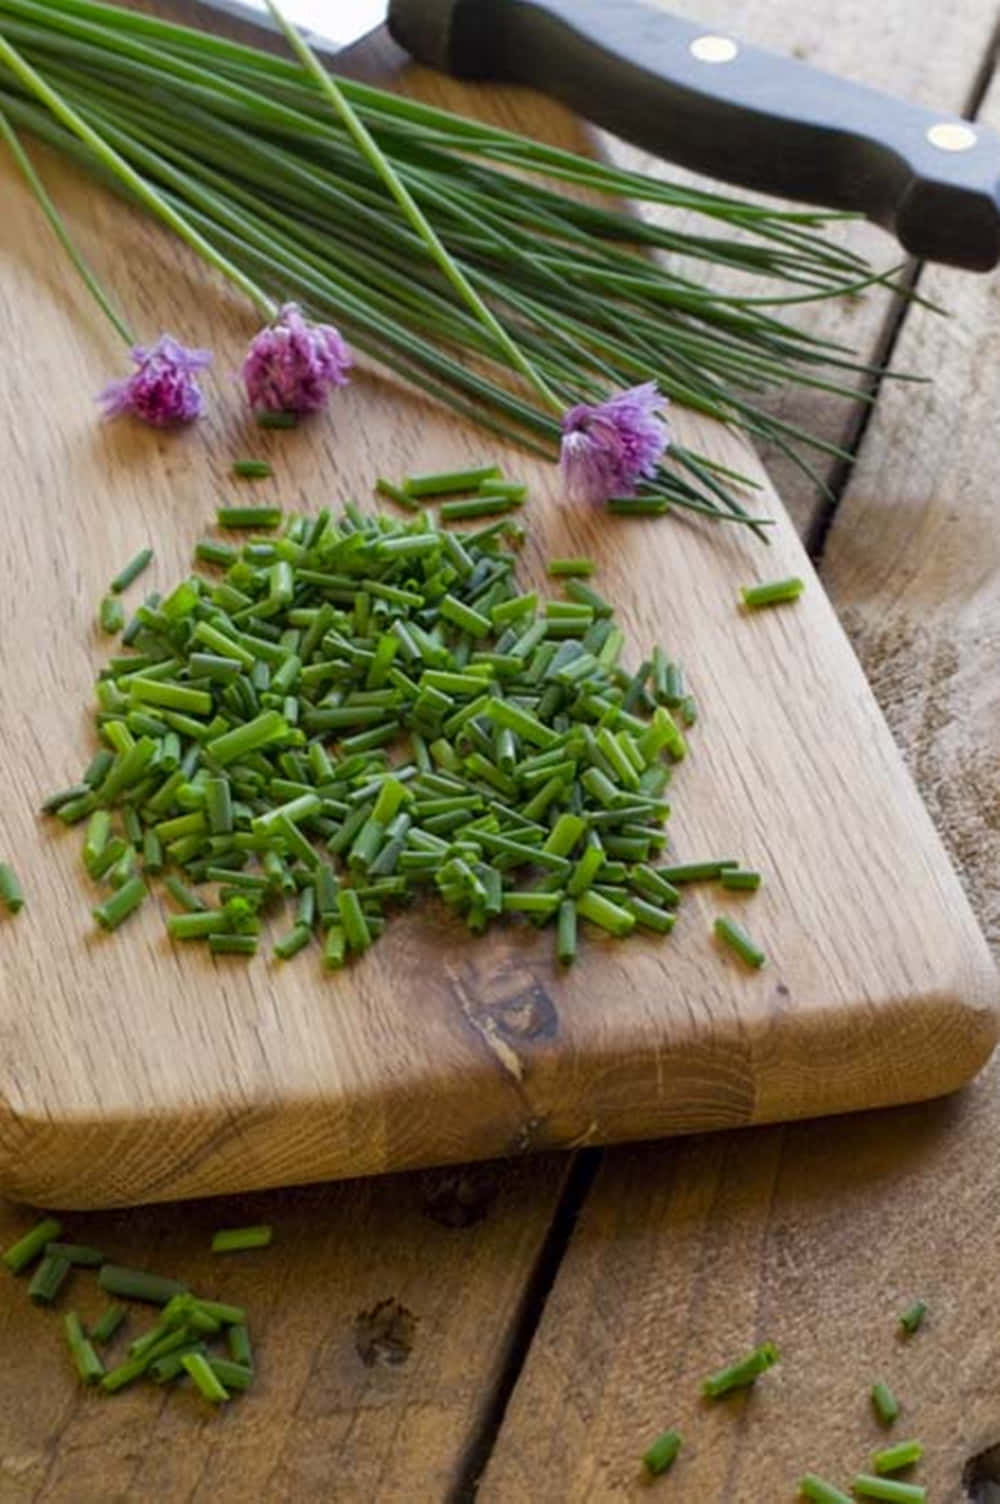 Chopped And Whole Green Chives With Purple Blossoms Wallpaper